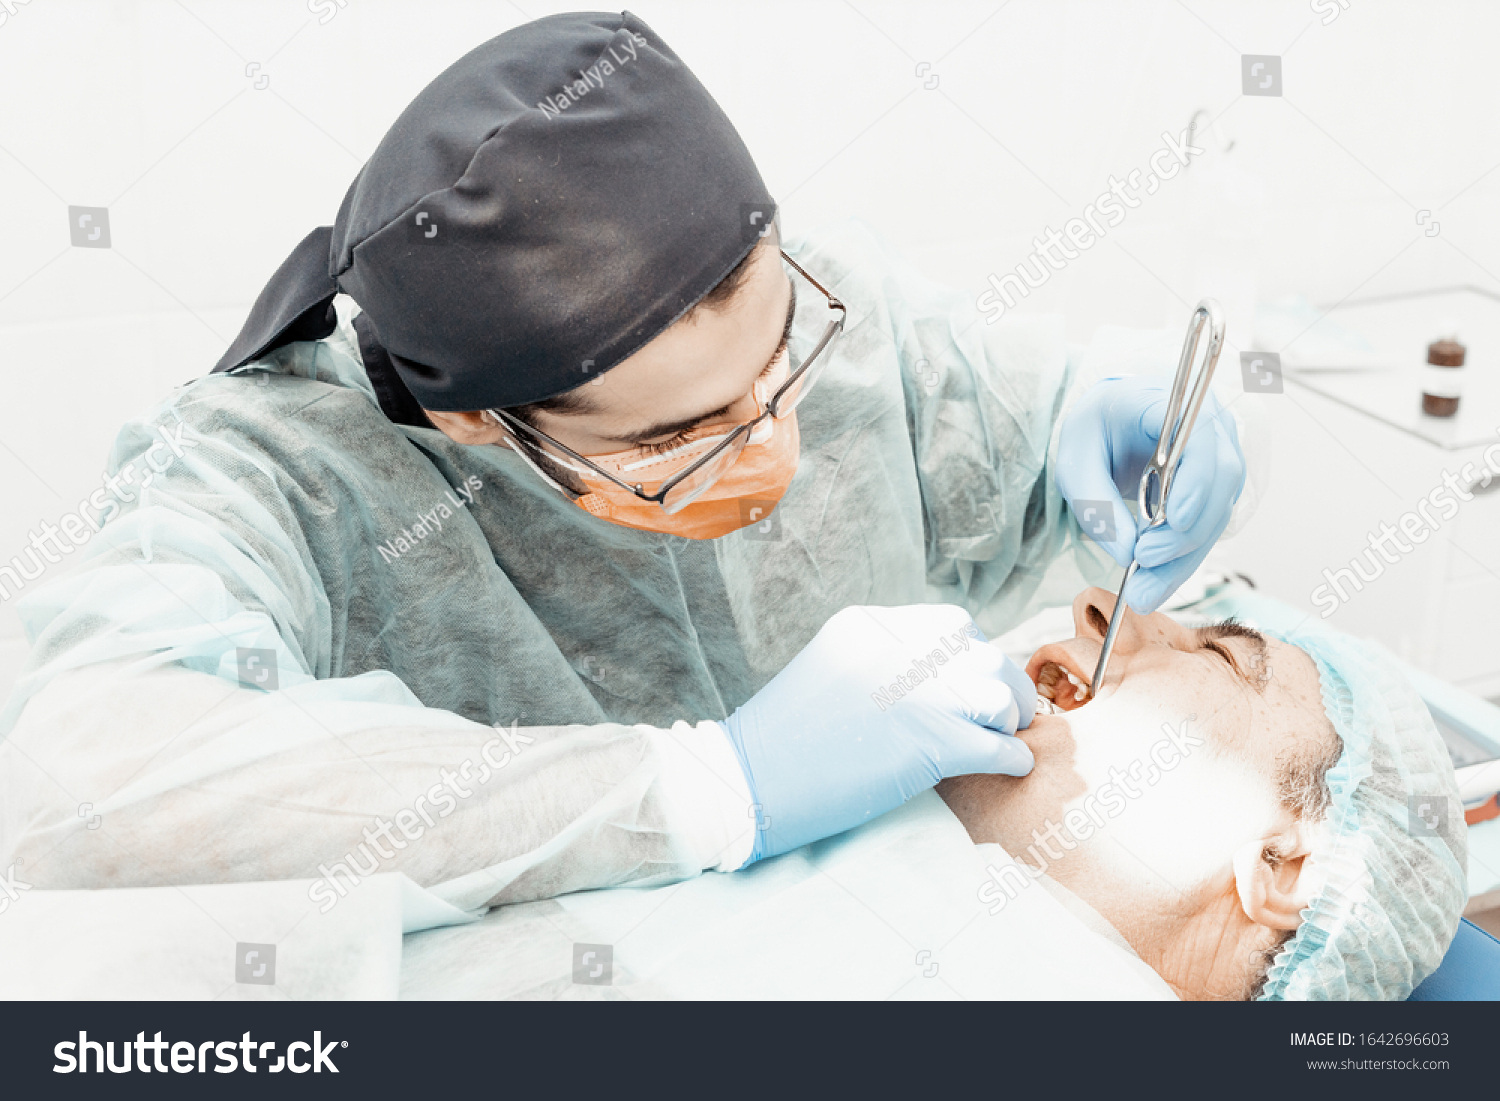 Patient and dentist during implant placement operation. Real operation. Tooth extraction, implants. Professional uniform and equipment of a dentist. Healthcare Equipping a doctor’s workplace.  #1642696603